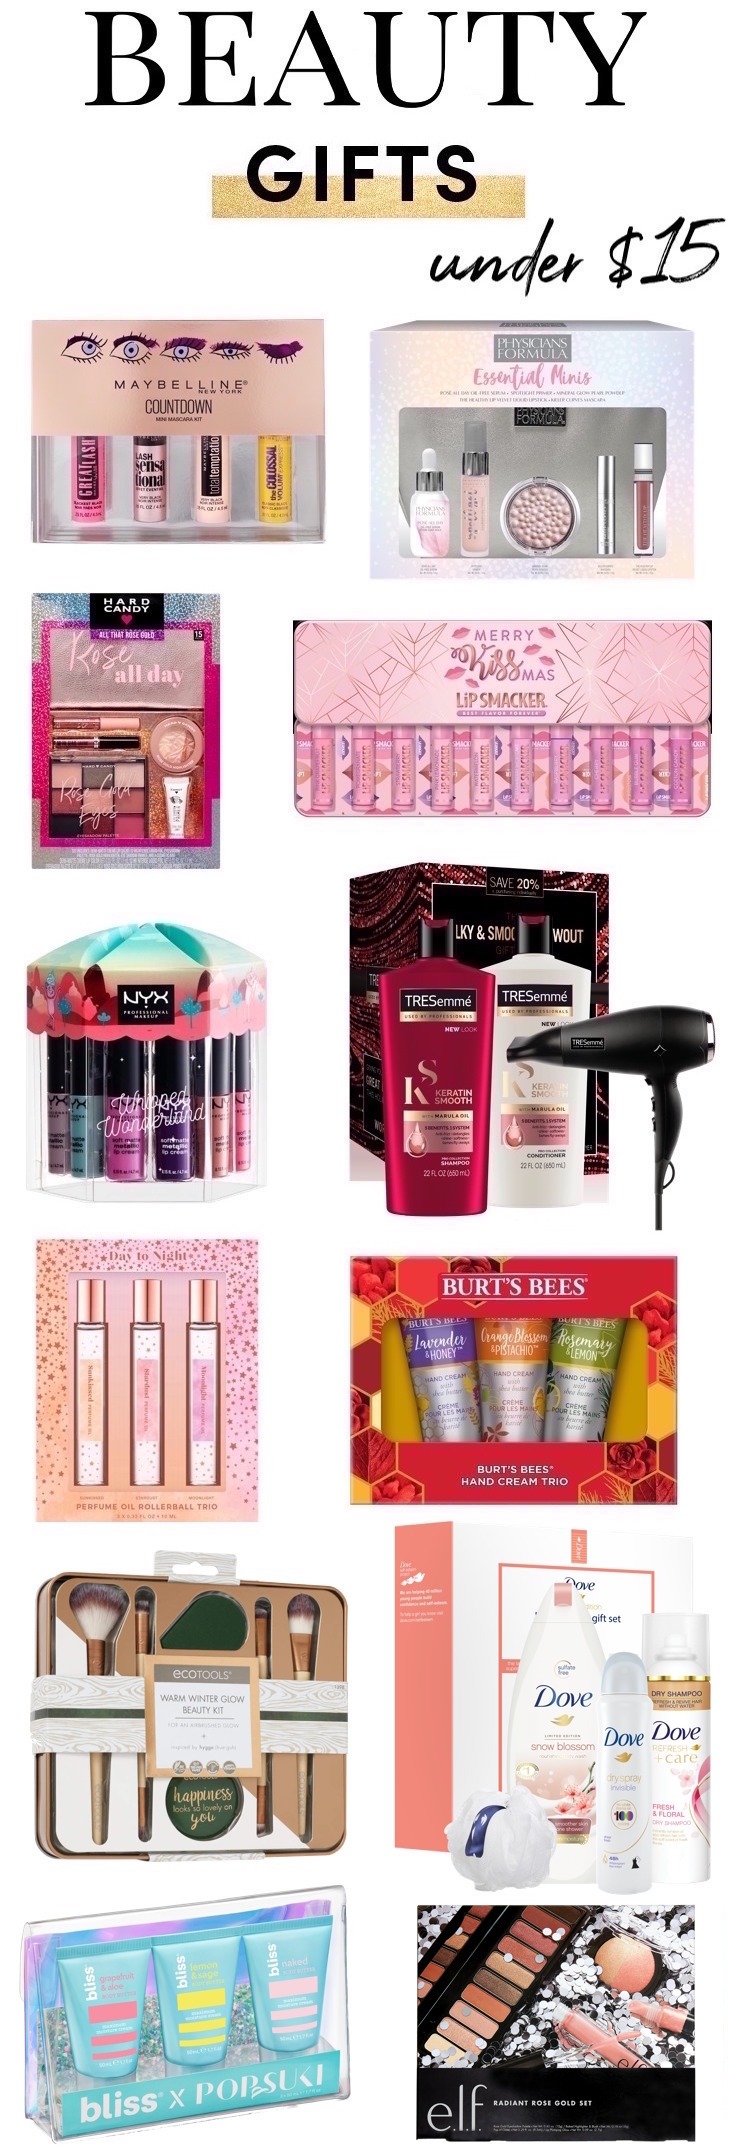 25 Drugstore Beauty Gifts (Mostly Under $15) You Just Can’t Miss